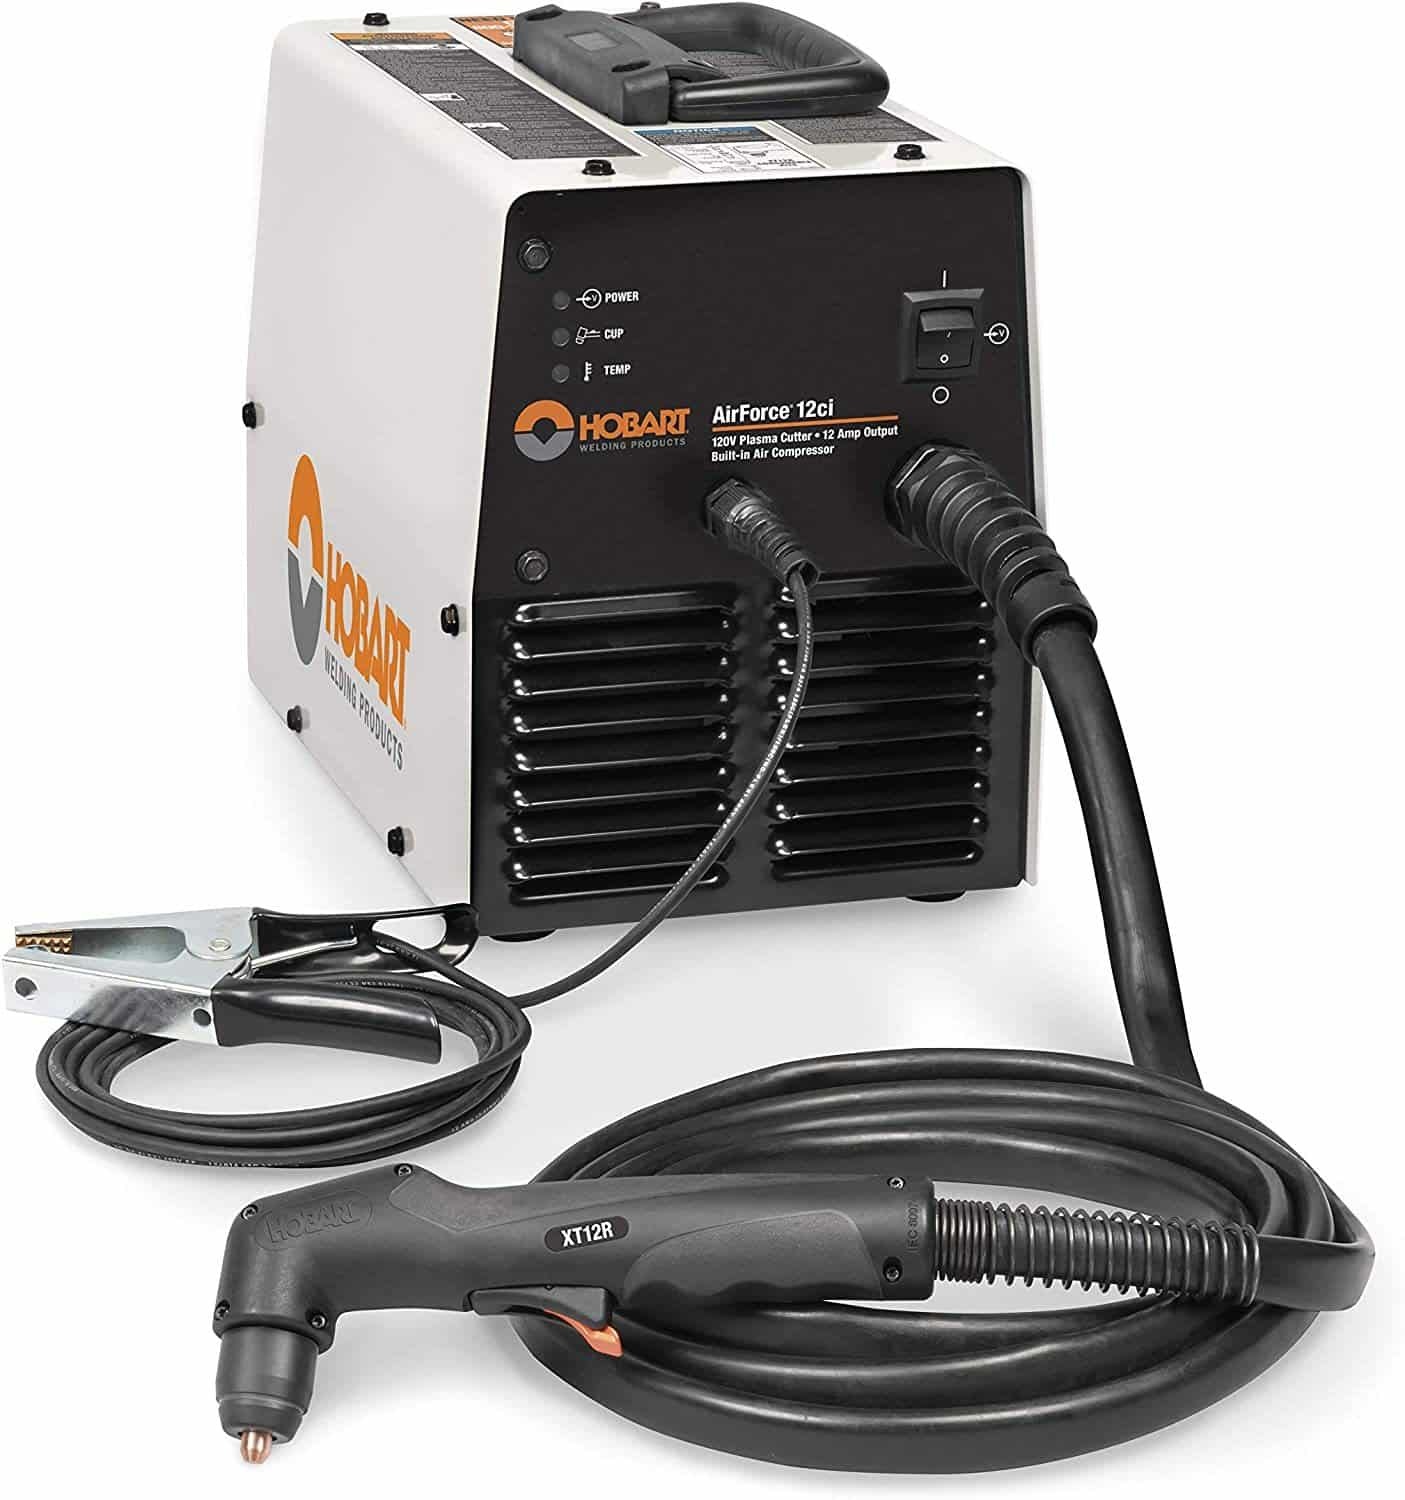 Hobart Airforce 12ci Plasma Cutter with Integrated Air Compressor